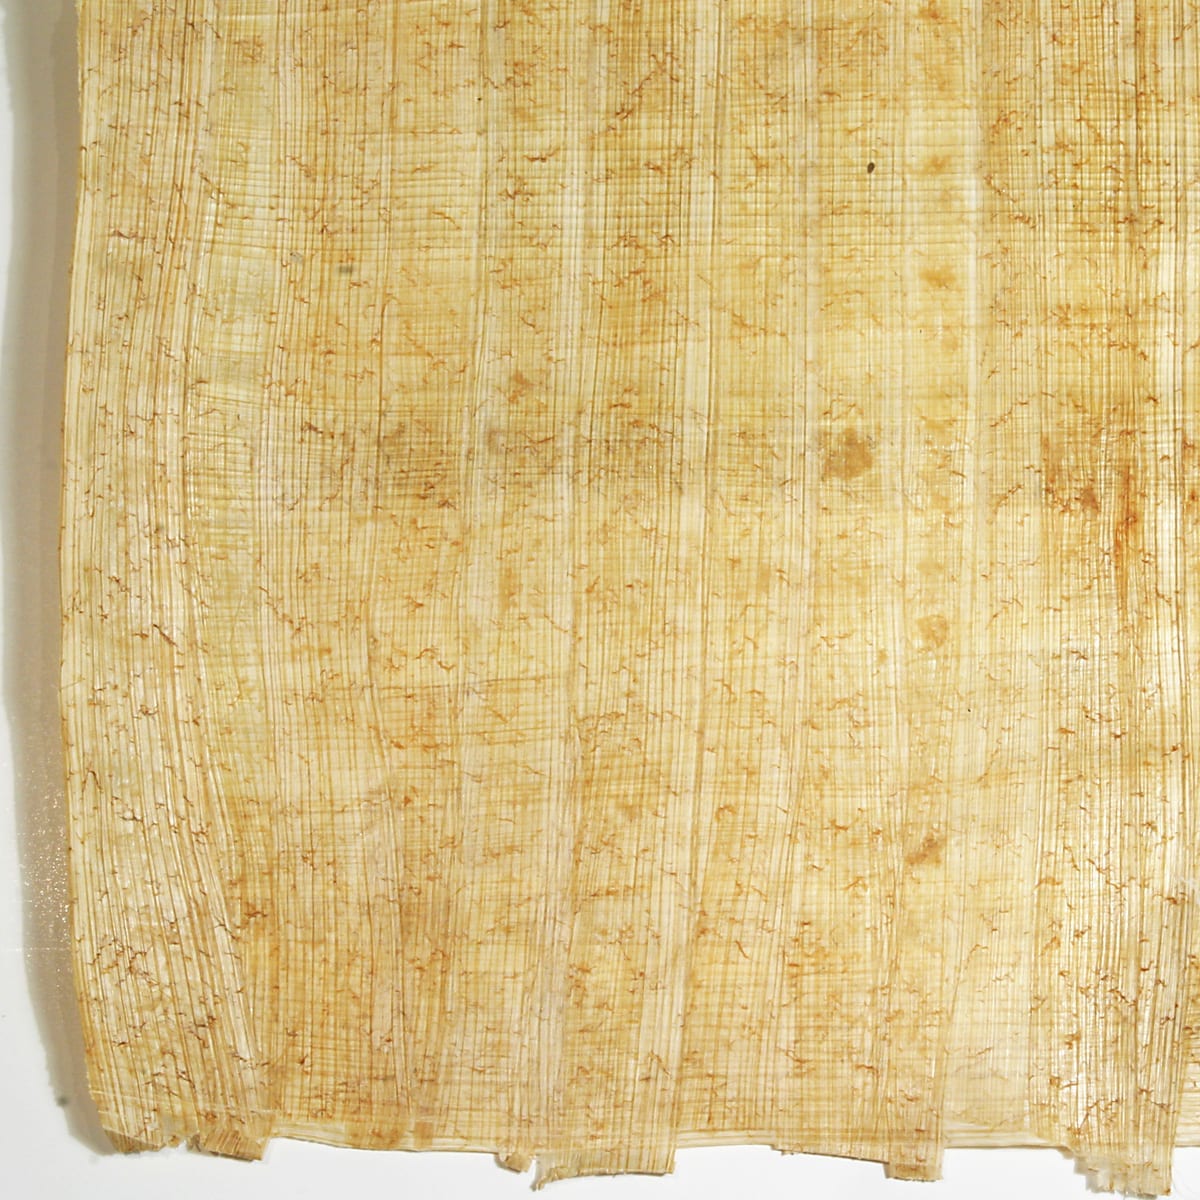 paper of papyrus